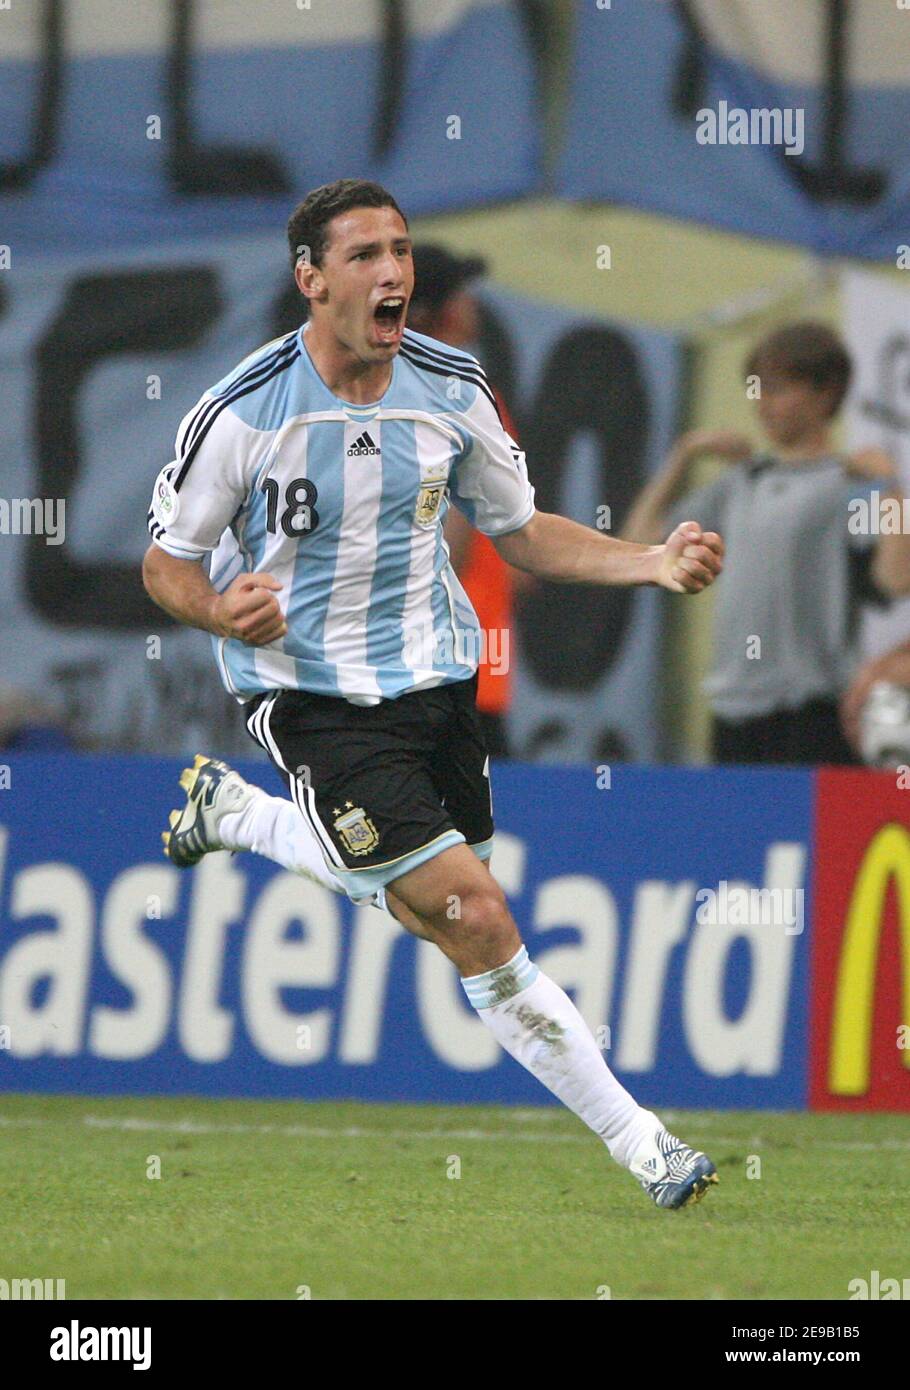 Argentina's Maxi Rodriguez celebrates after scoring his second goal during the World Cup 2006, Second round, Argentina vs Mexico at the Zentralstadion stadium in Leipzig, Germany on June 24, 2006. Argentina won 2-1. Photo by Gouhier-Hahn-Orban/Cameleon/ABACAPRESS.COM Stock Photo